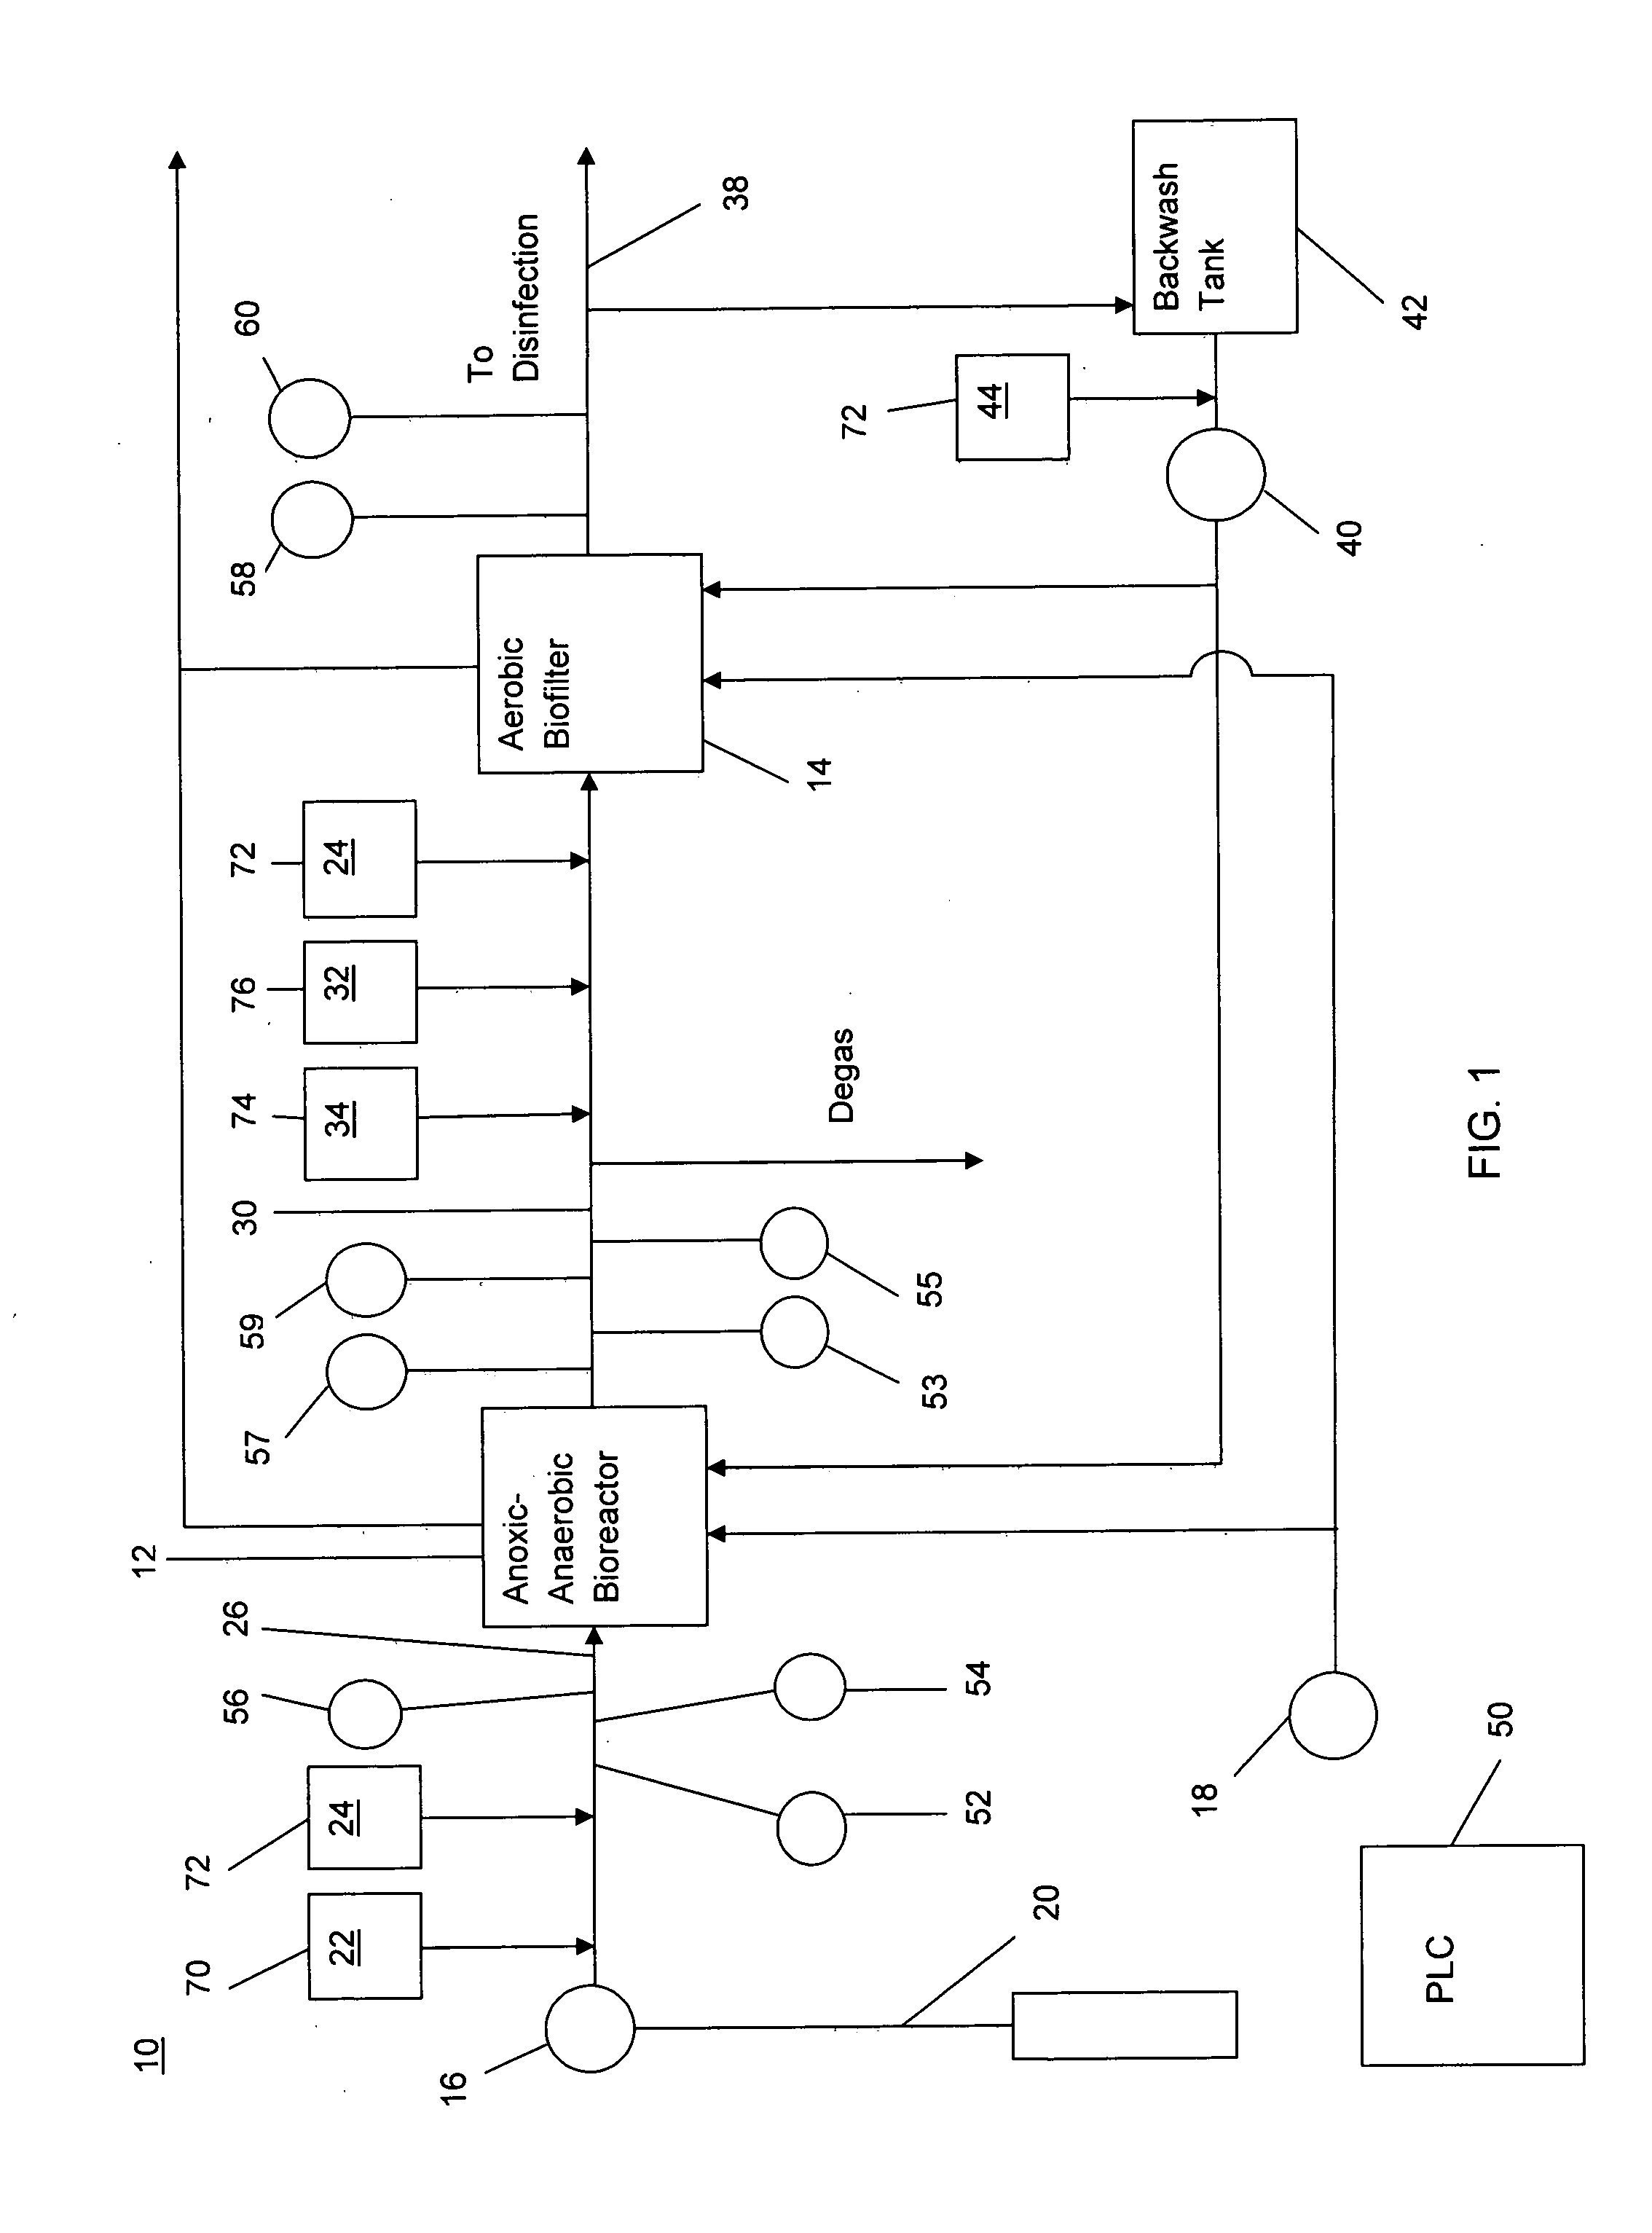 Biological two-stage contaminated water treatment system